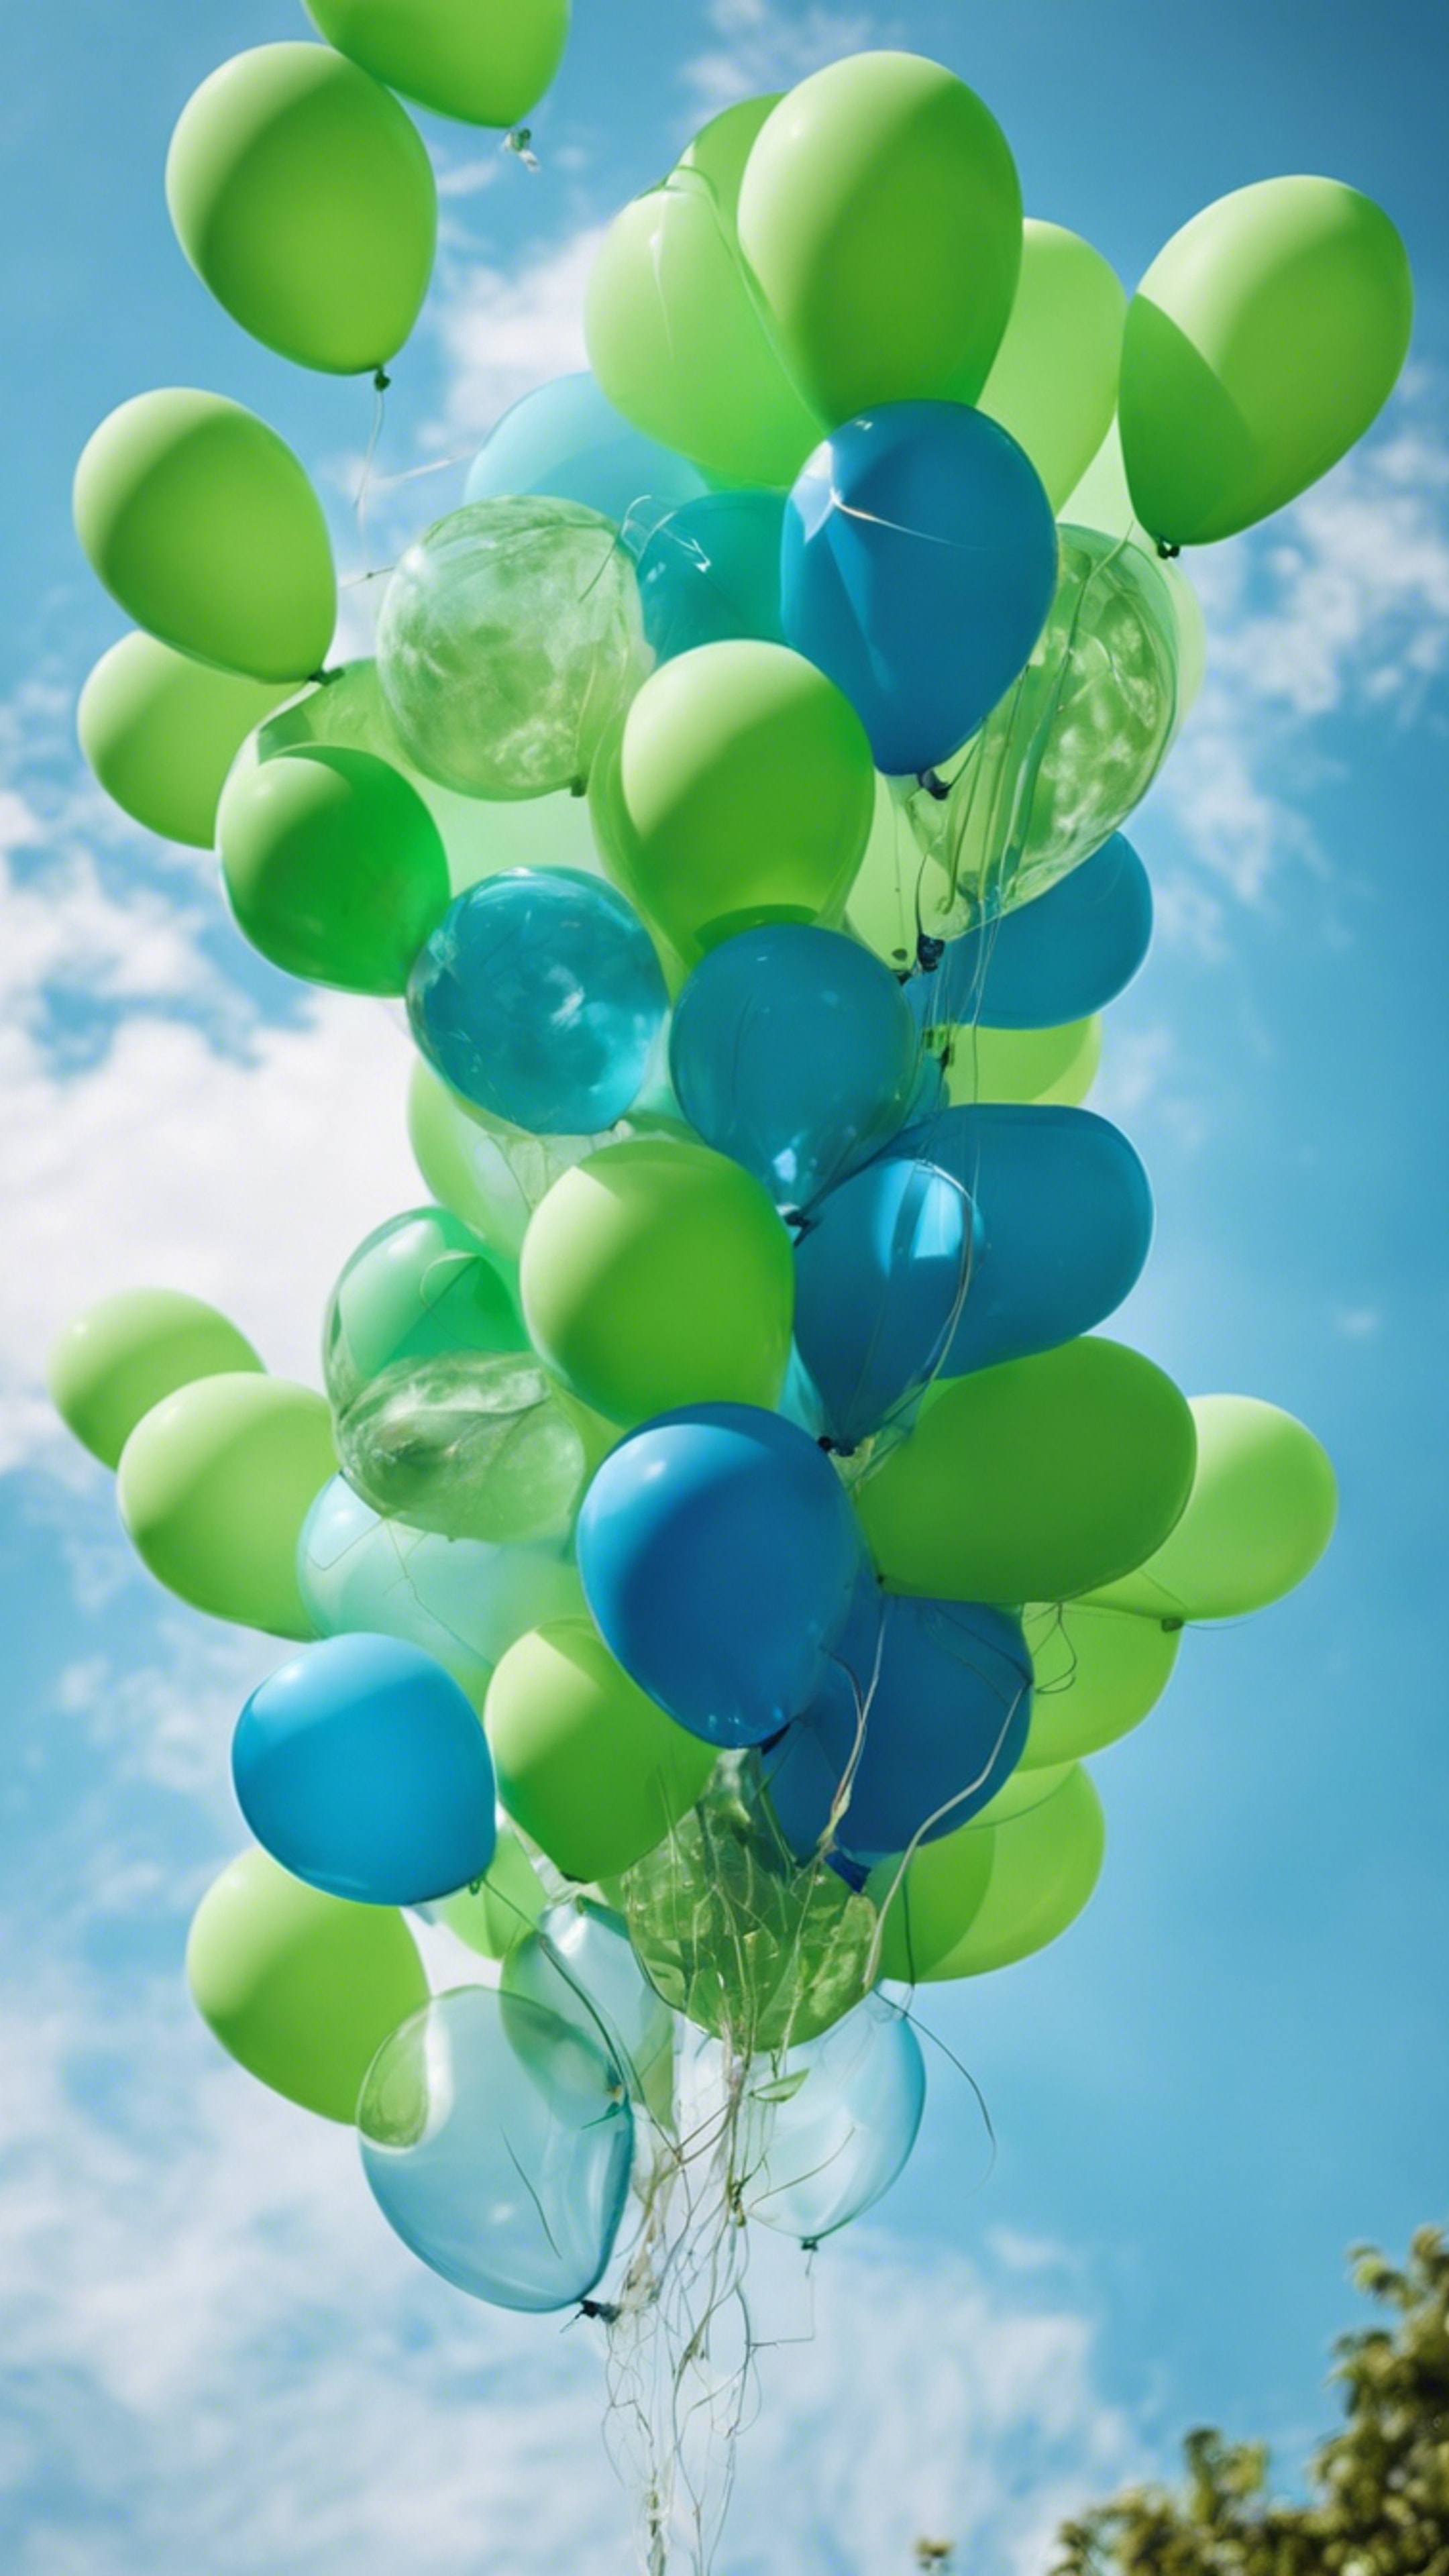 An array of blue and green balloons floating in a clear sky during the day. Tapeta[0f6c85f120014fa1a128]